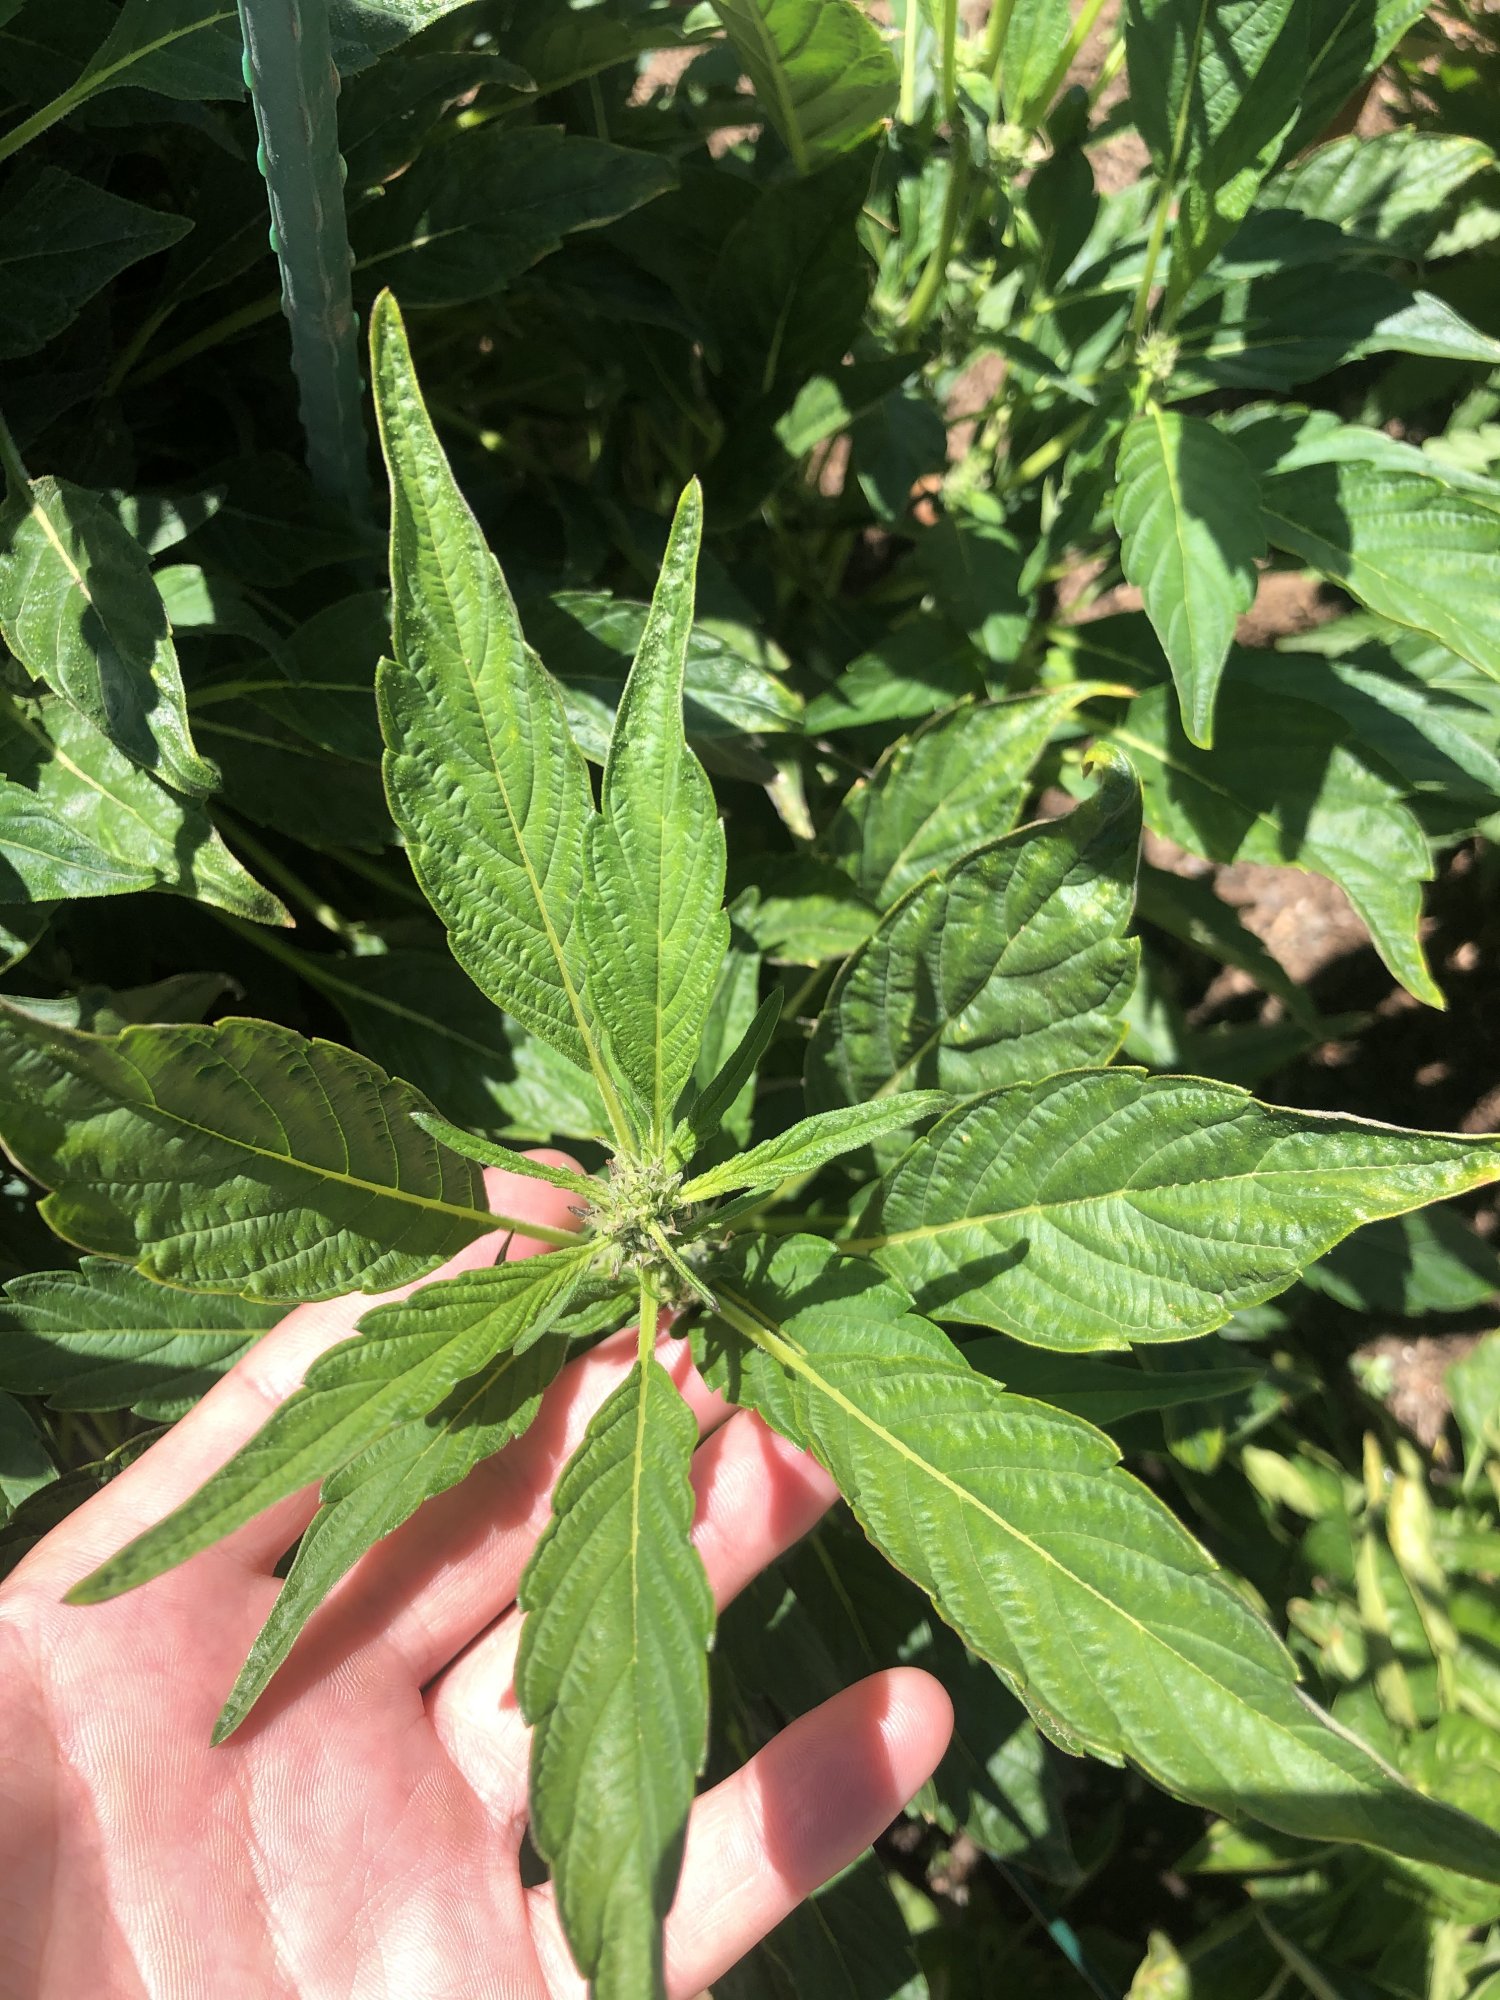 Help amateur grower running into issues